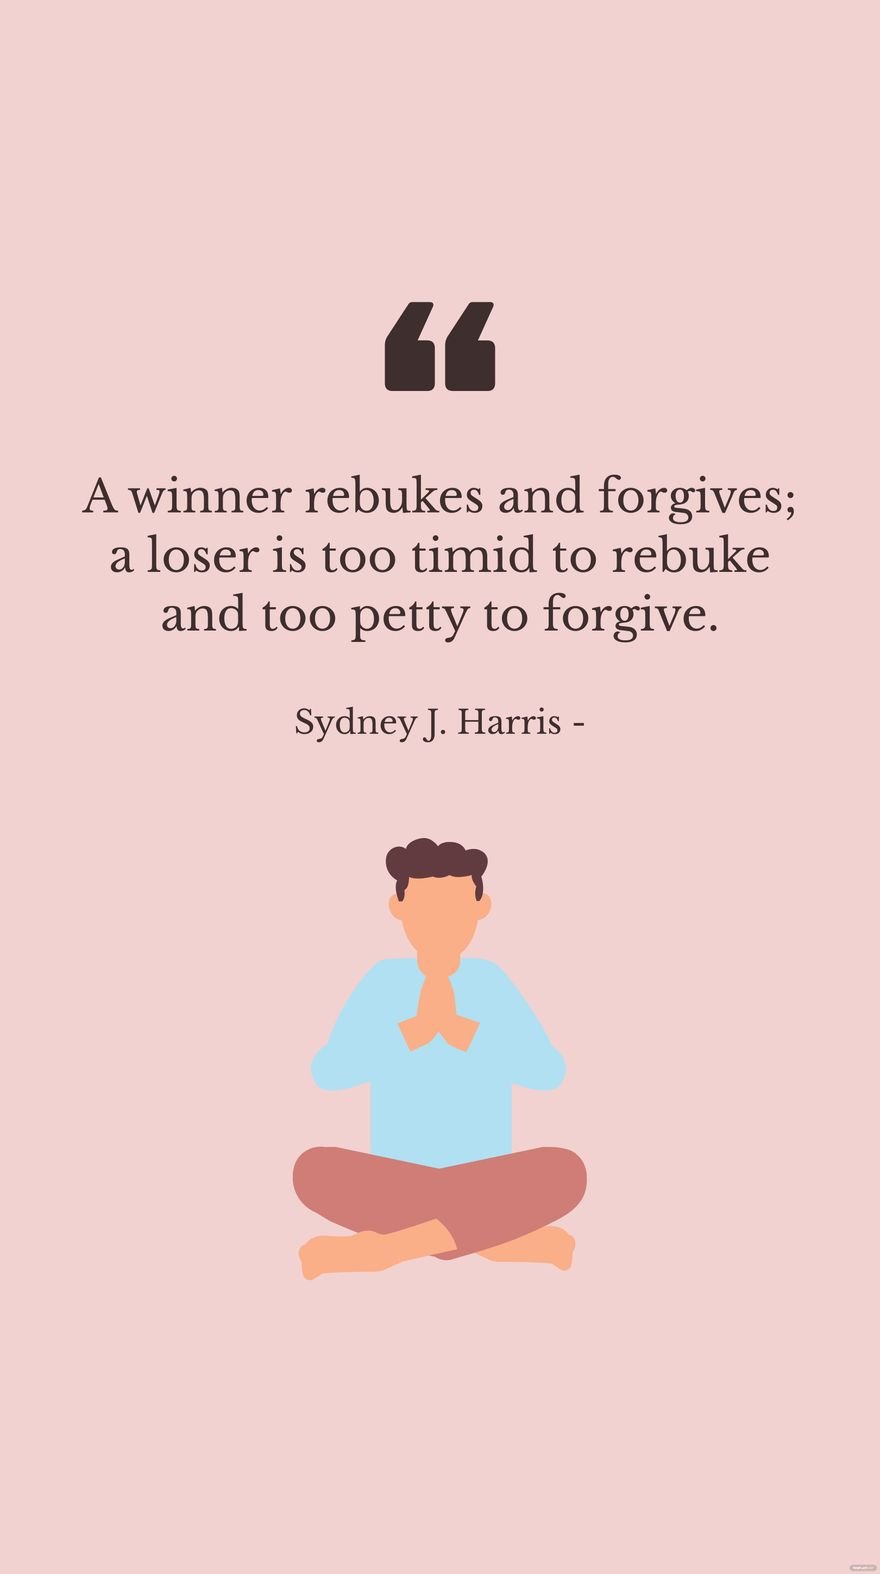 Sydney J. Harris - A winner rebukes and forgives; a loser is too timid to rebuke and too petty to forgive. in JPG